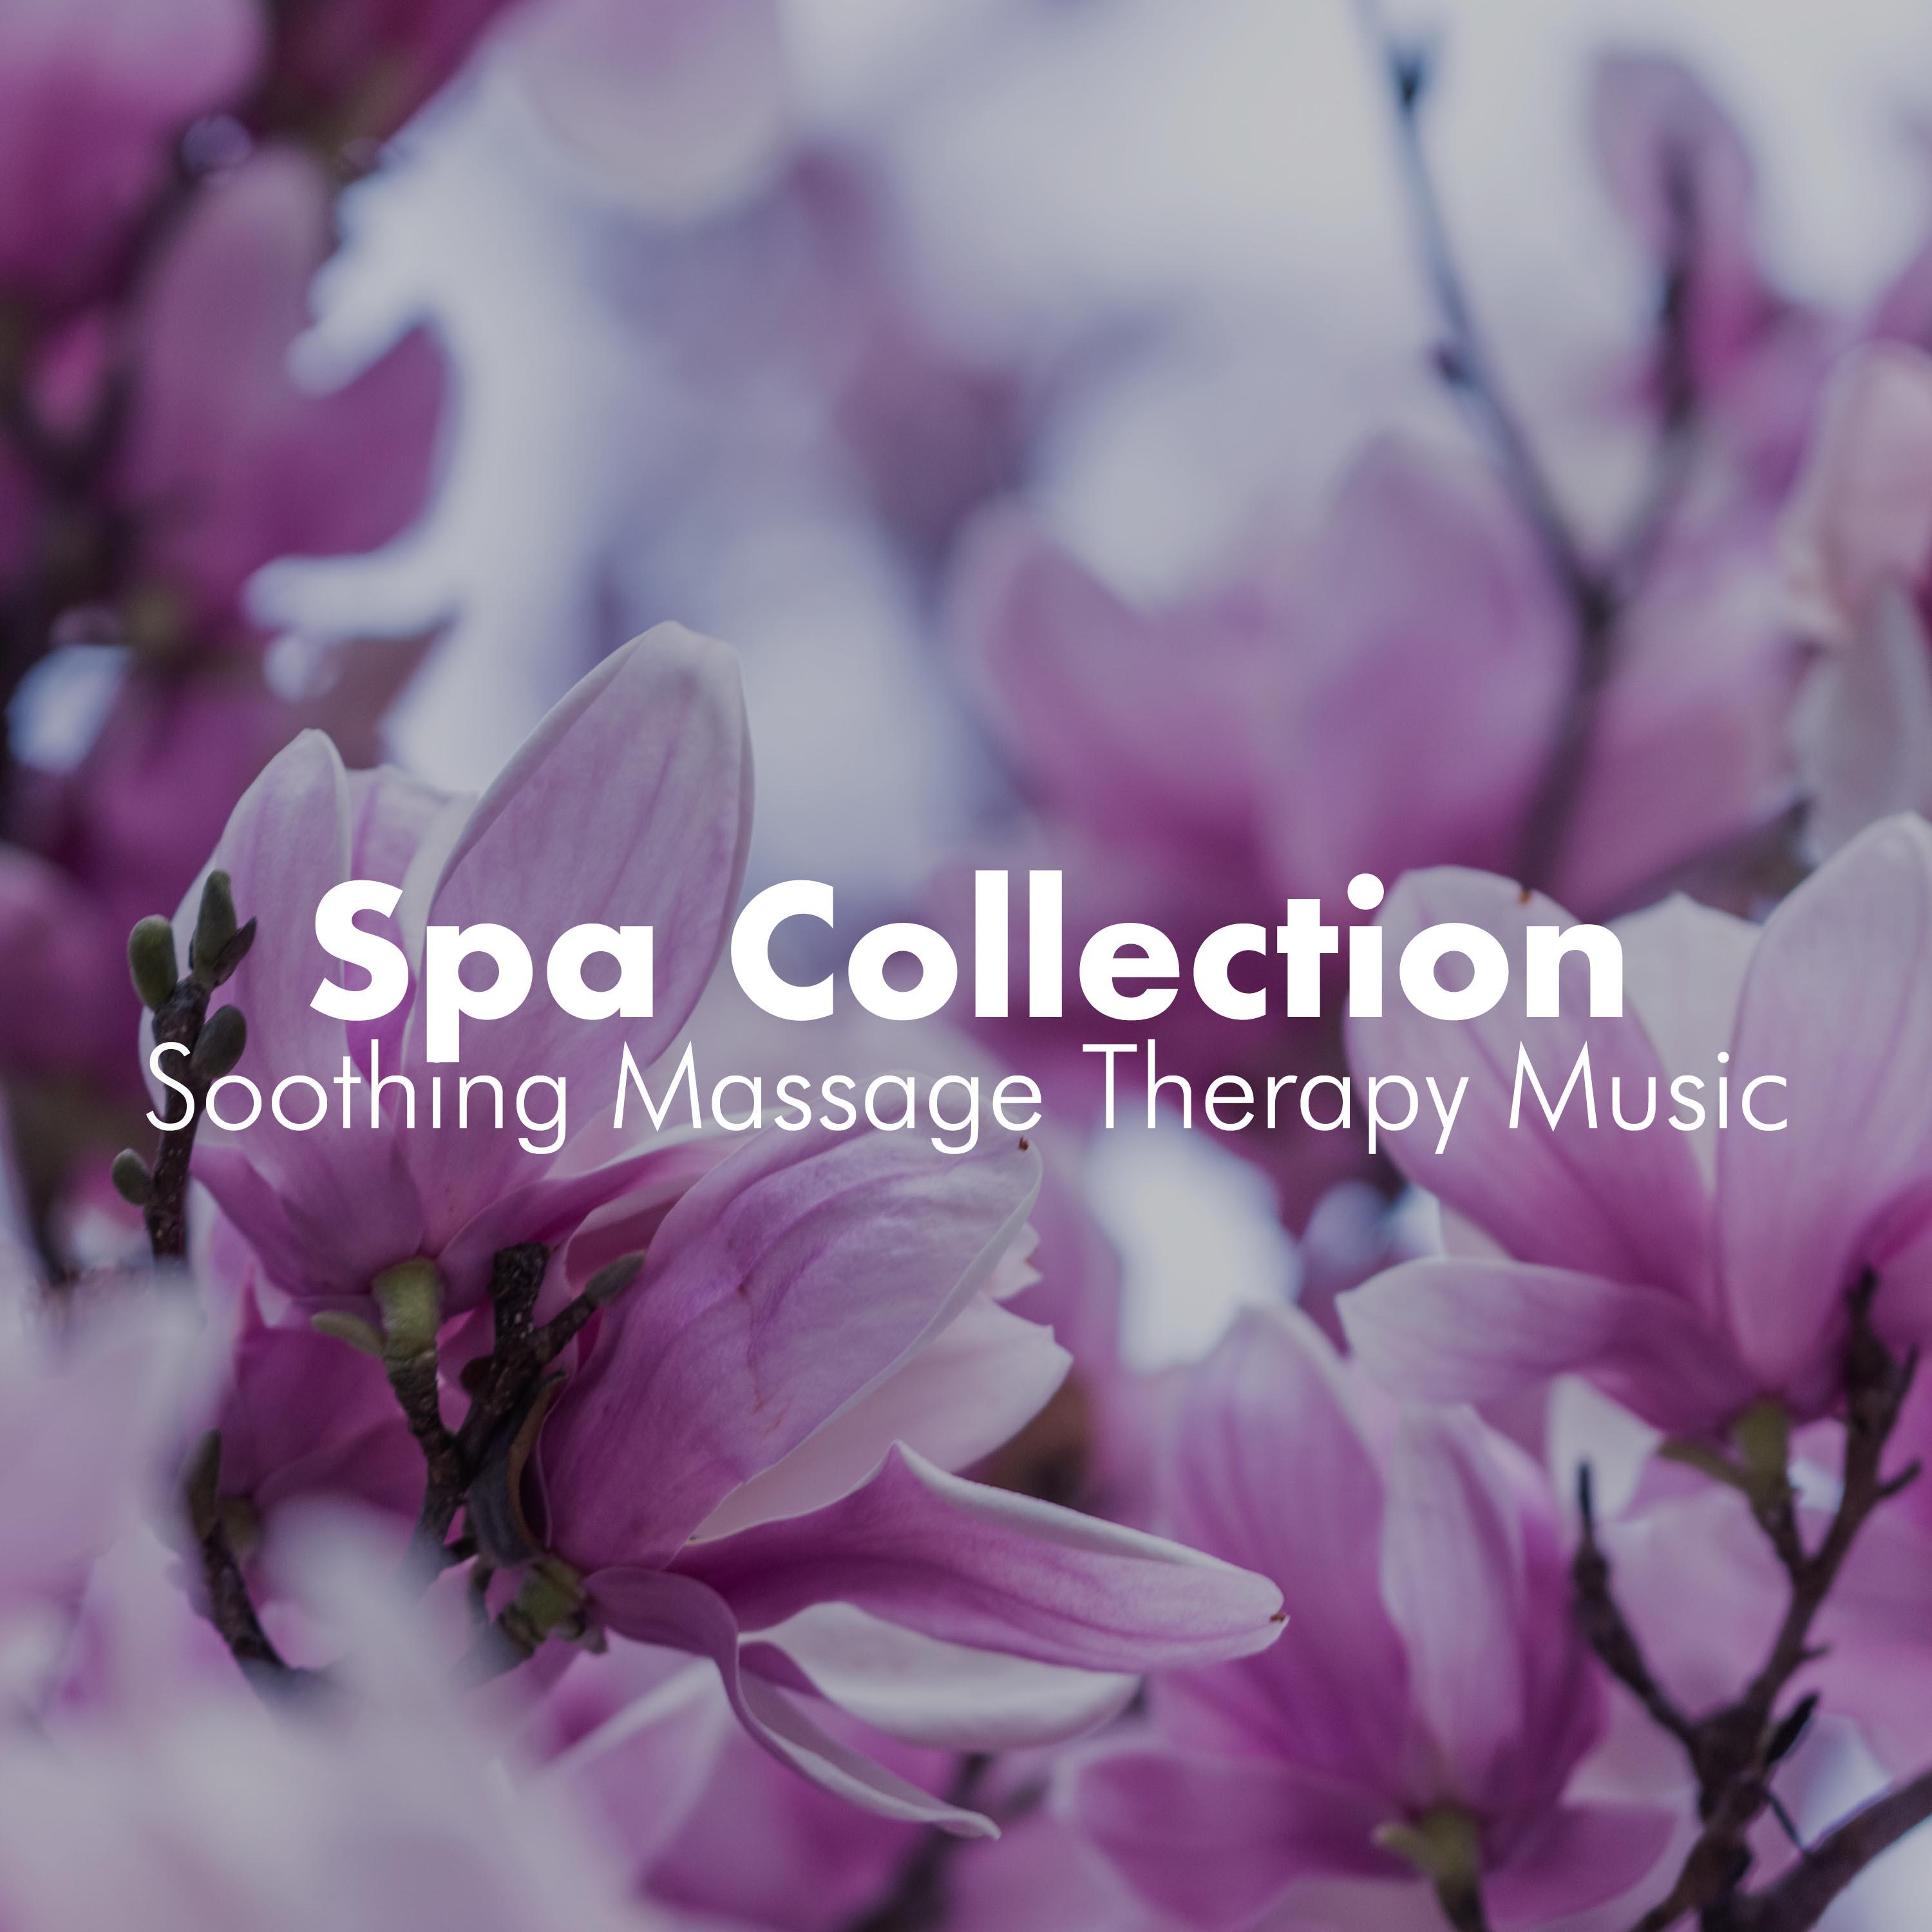 Spa Collection - Soothing Massage Therapy Music, Spa Meditation, Best Spa Music with Nature Sounds